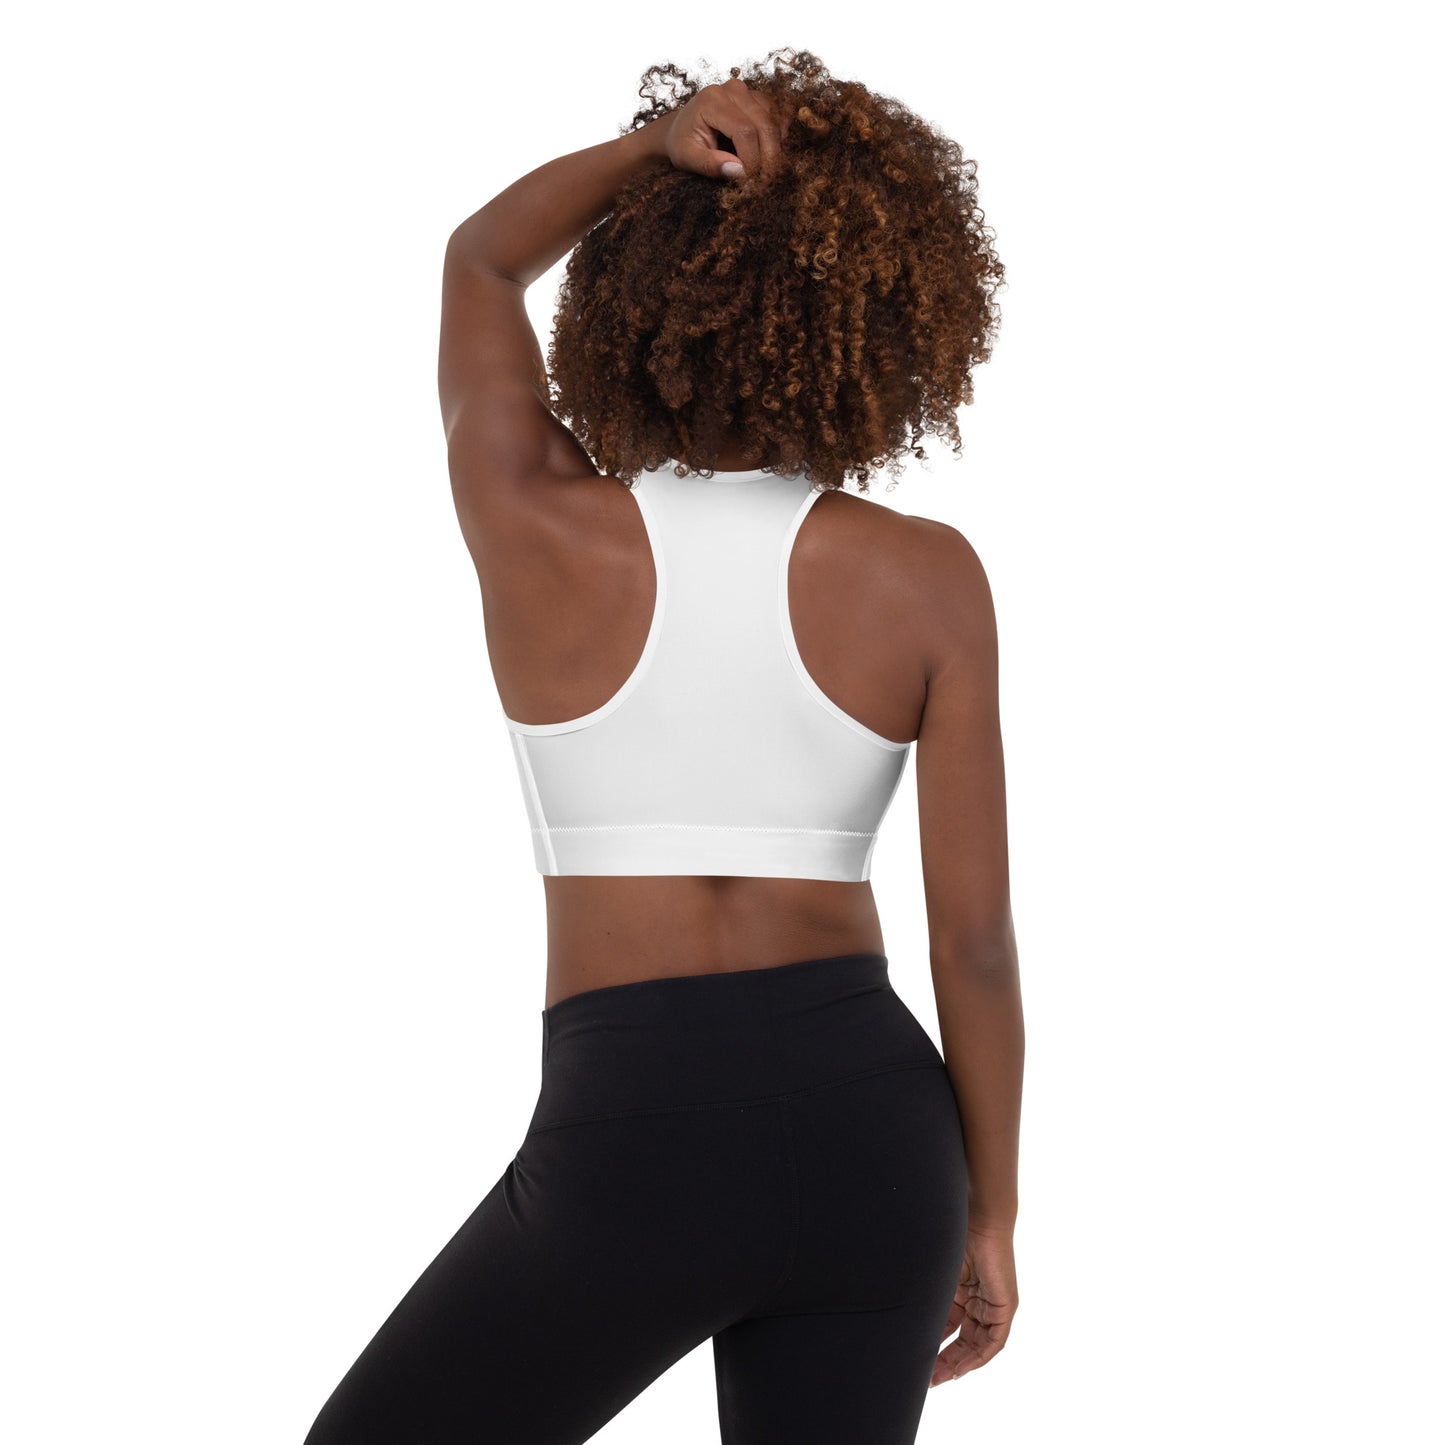 A picture of a woman standing in a wearing a yoga White Padded Sports Bra - back side